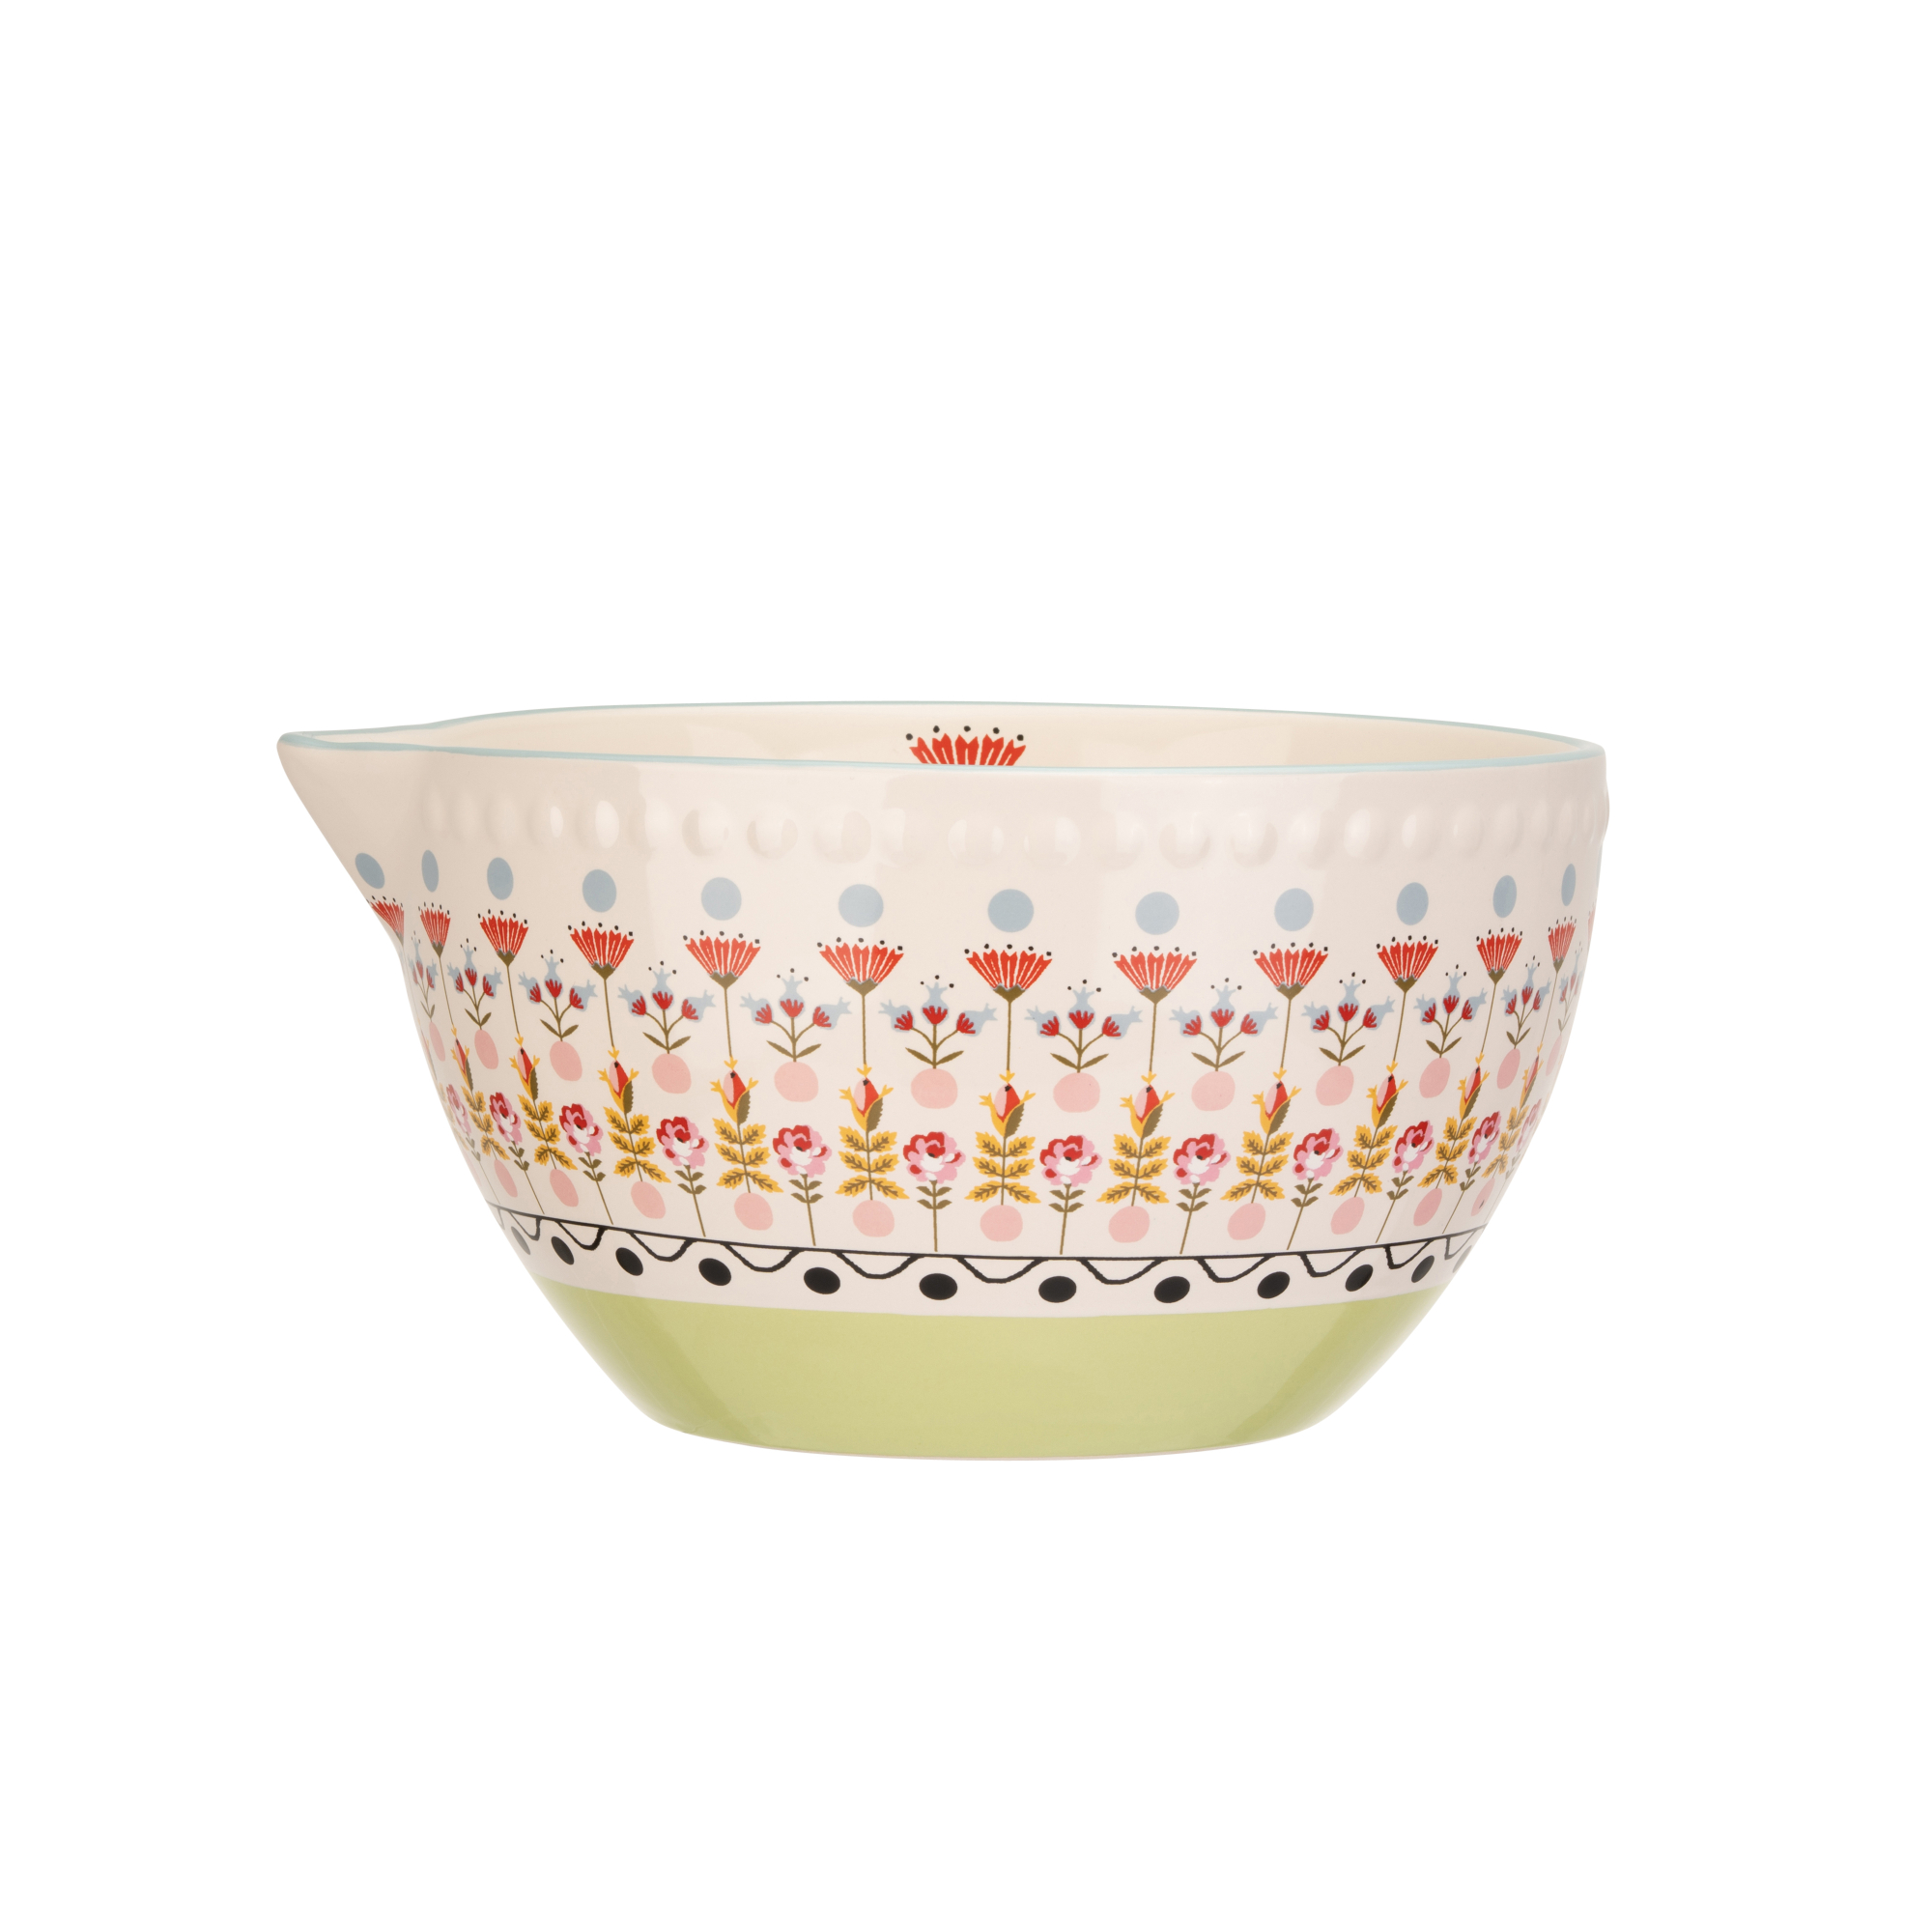 Cath Kidston Painted Table Ceramic Mixing Bowl - 23cm